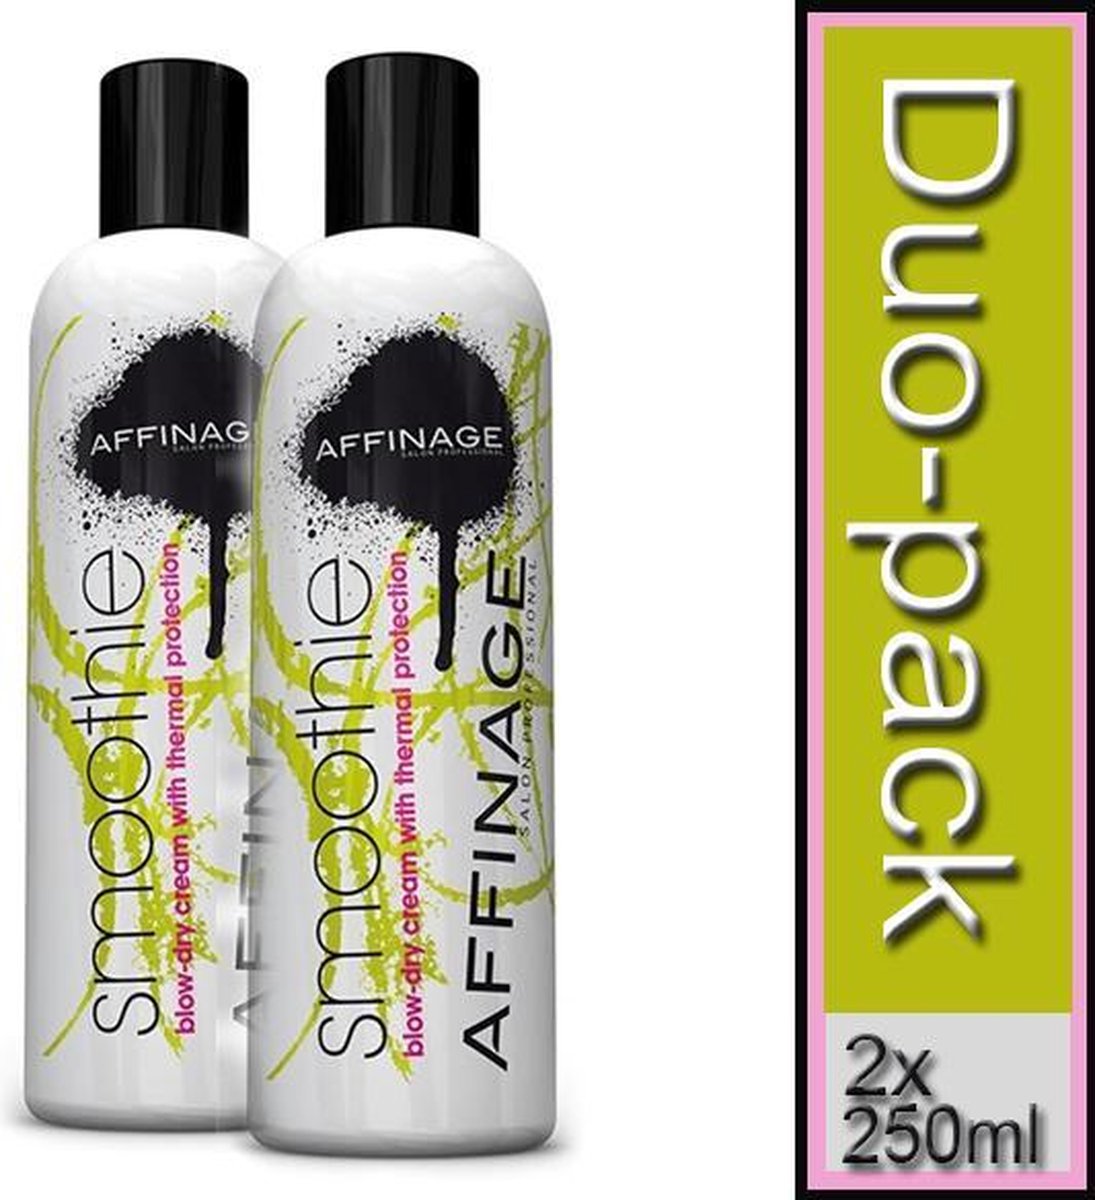 Duo-pack Affinage Mode Smoothie 2x 250ml